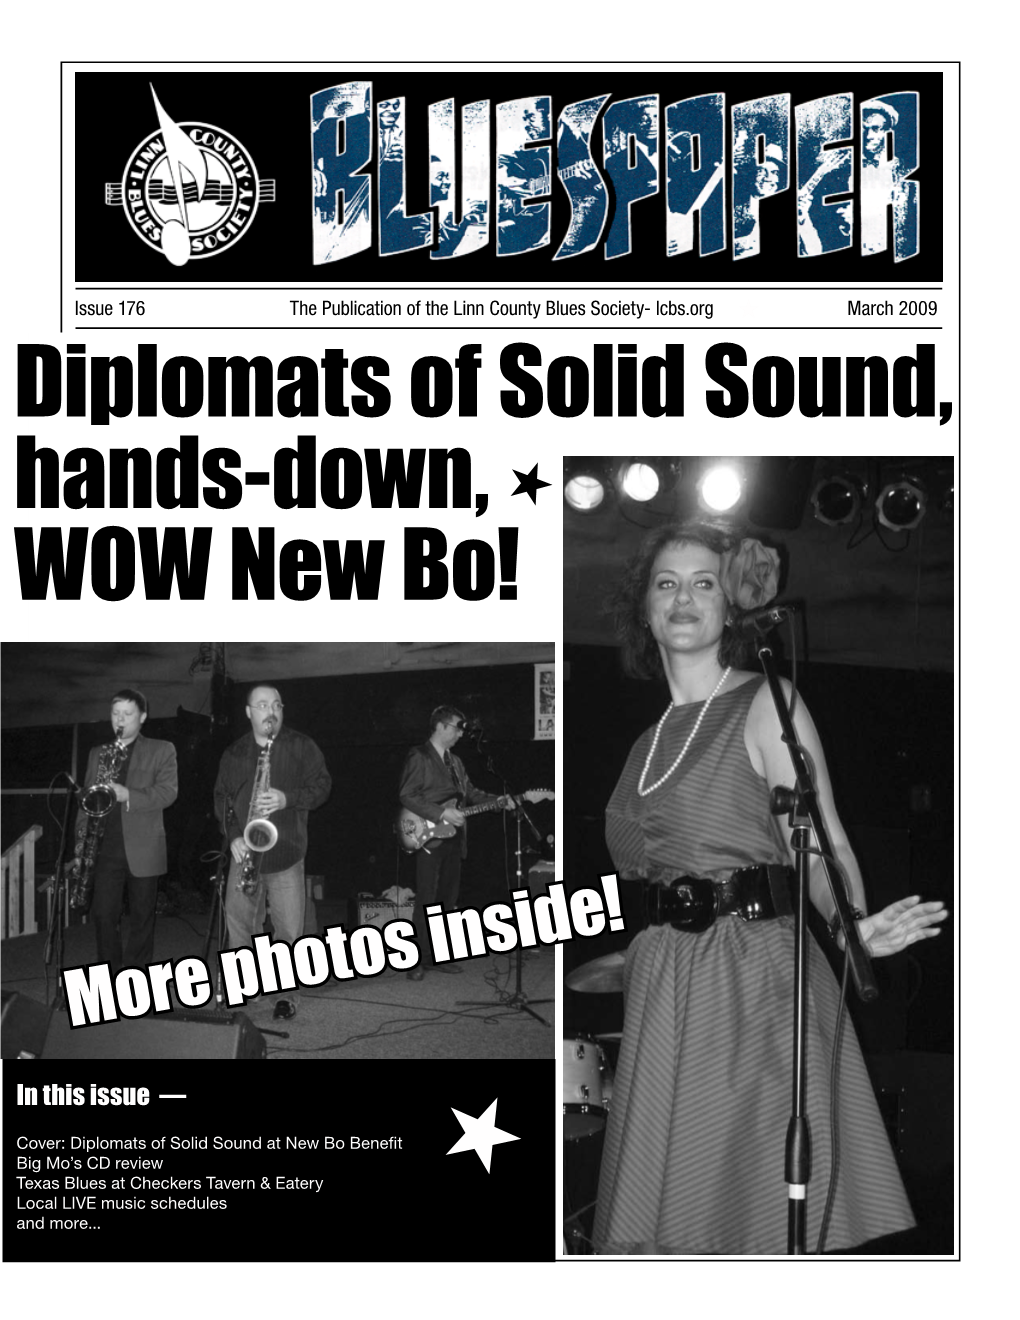 Diplomats of Solid Sound, Hands-Down, WOW New Bo!